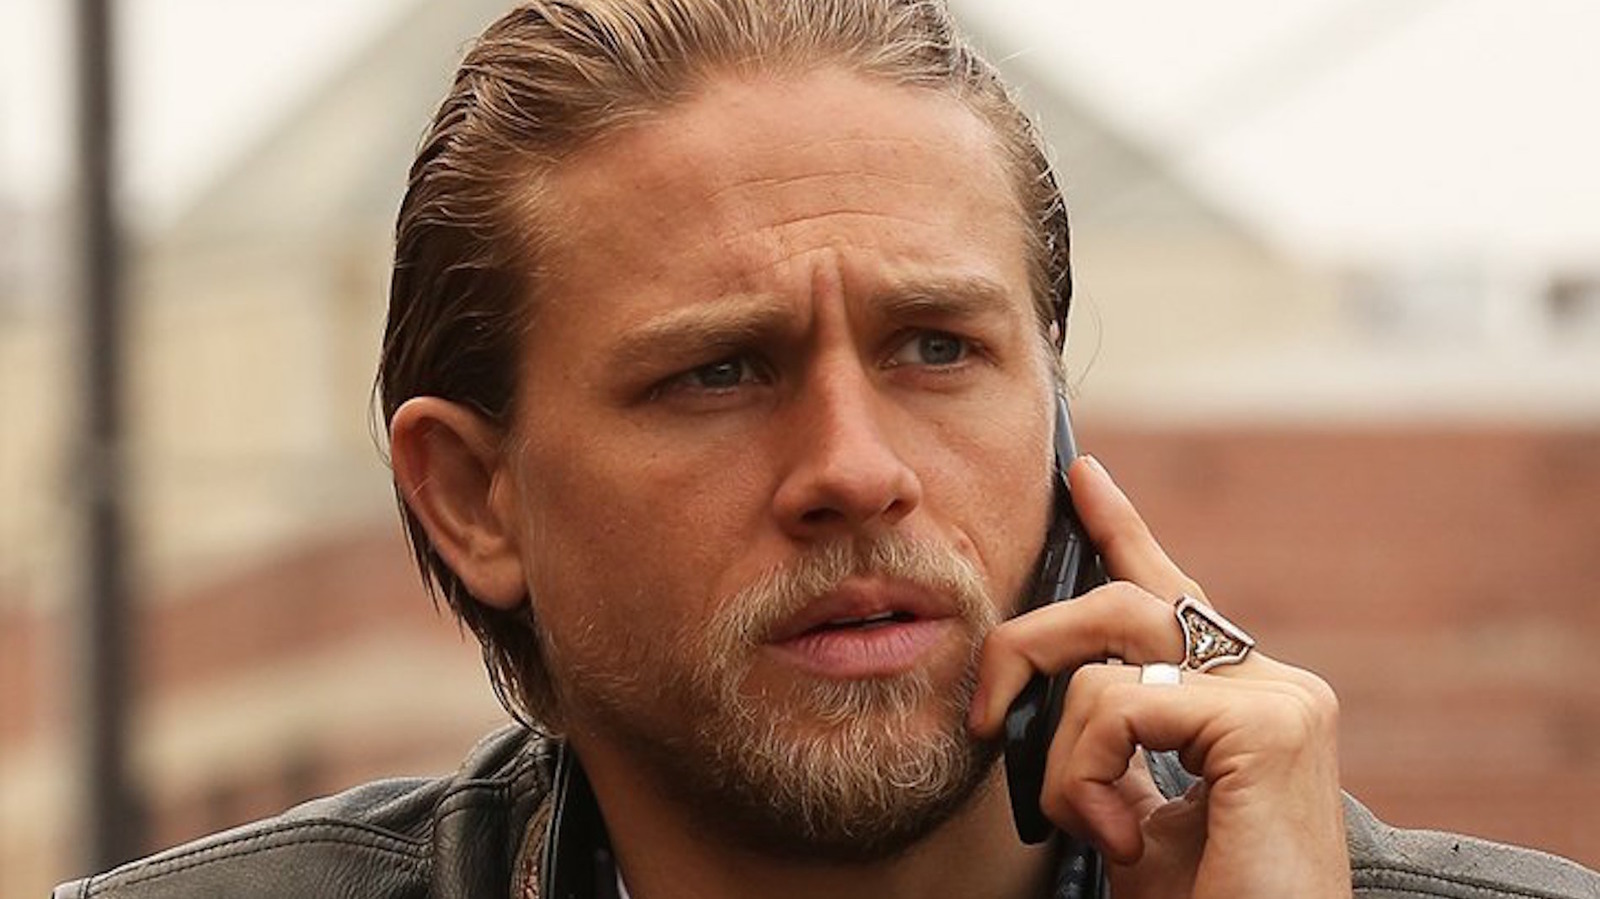 Charlie Hunnam confirmed rumours he might be returning to Sons of Anarchy